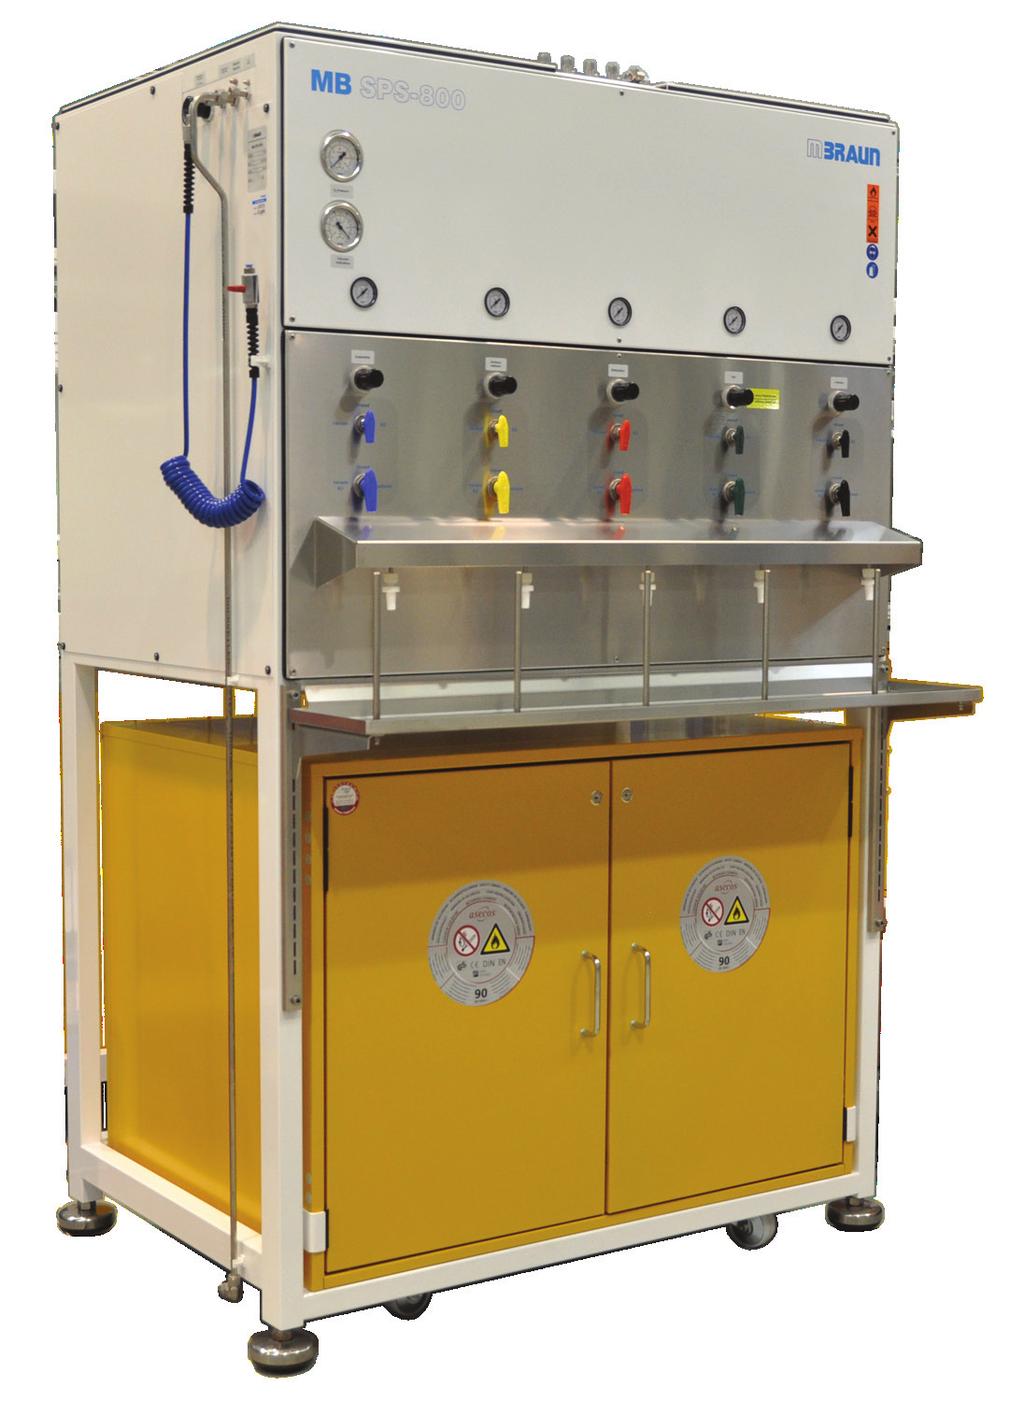 SOLVENT PURIFICATION MBRAUN Solvent Purification Operation: MBRAUN offers the safest, fastest and easiest way to dispense ultra pure solvents.